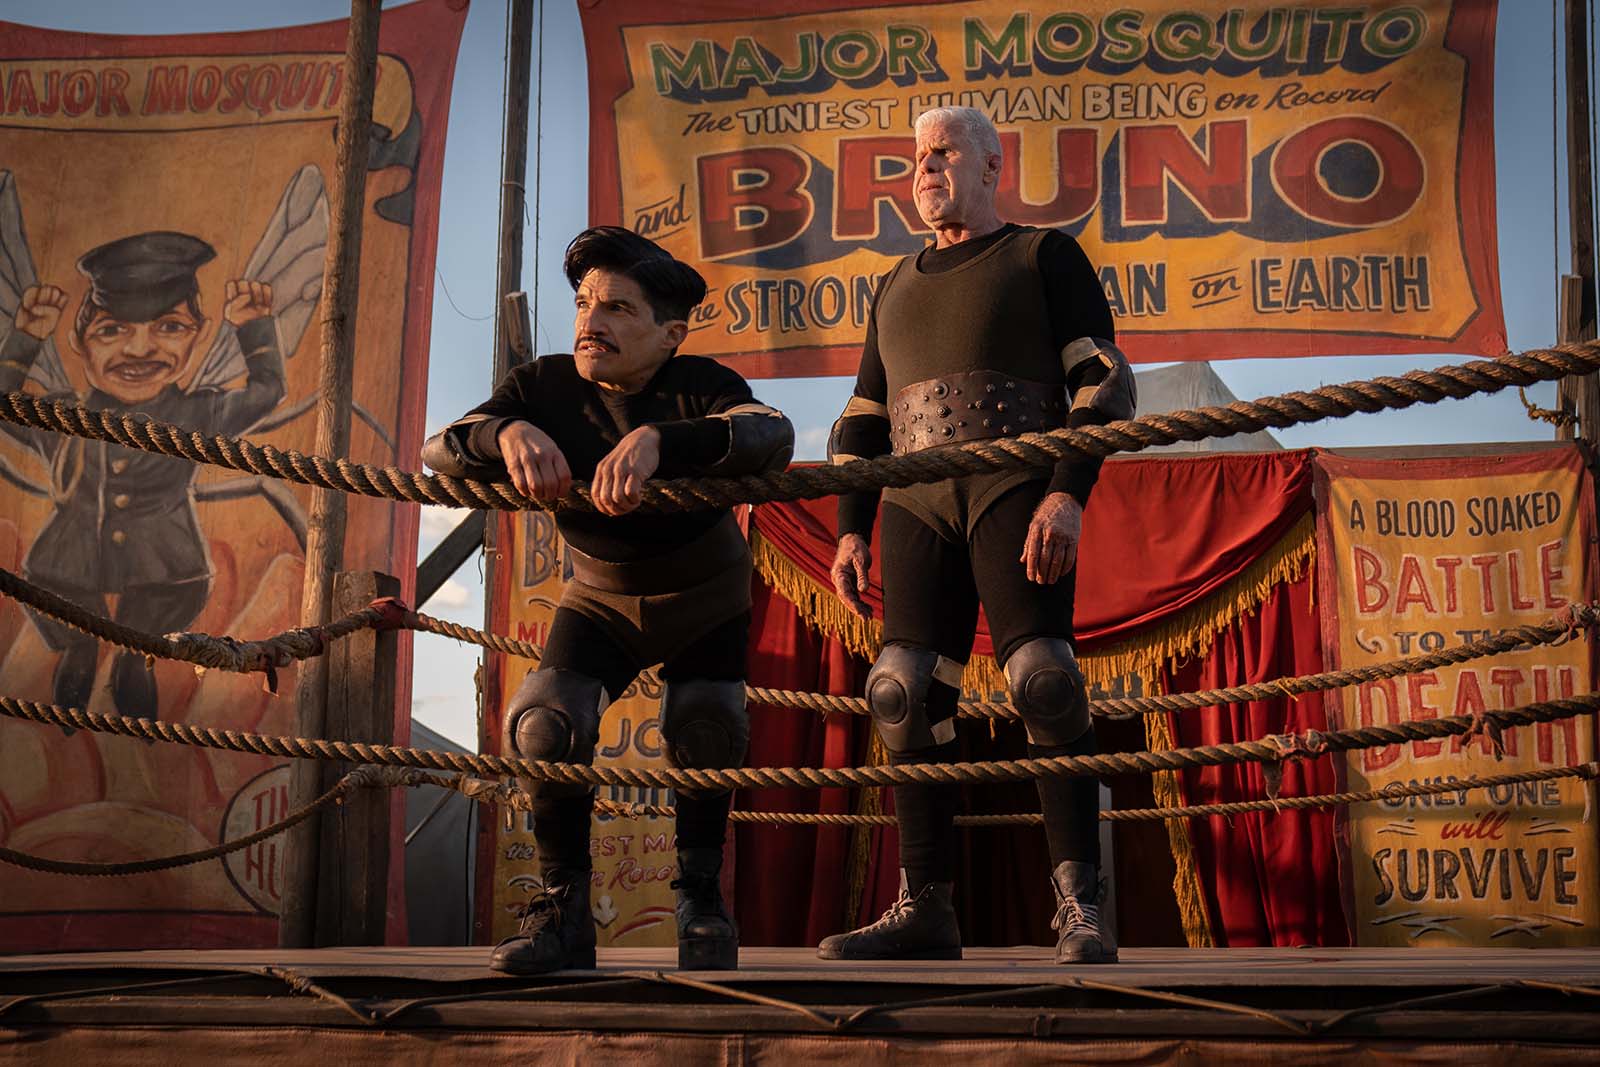 Mark Povinelli as The Major and Ron Perlman as Bruno, two members of the carnival’s troupe. Image © Searchlight Pictures